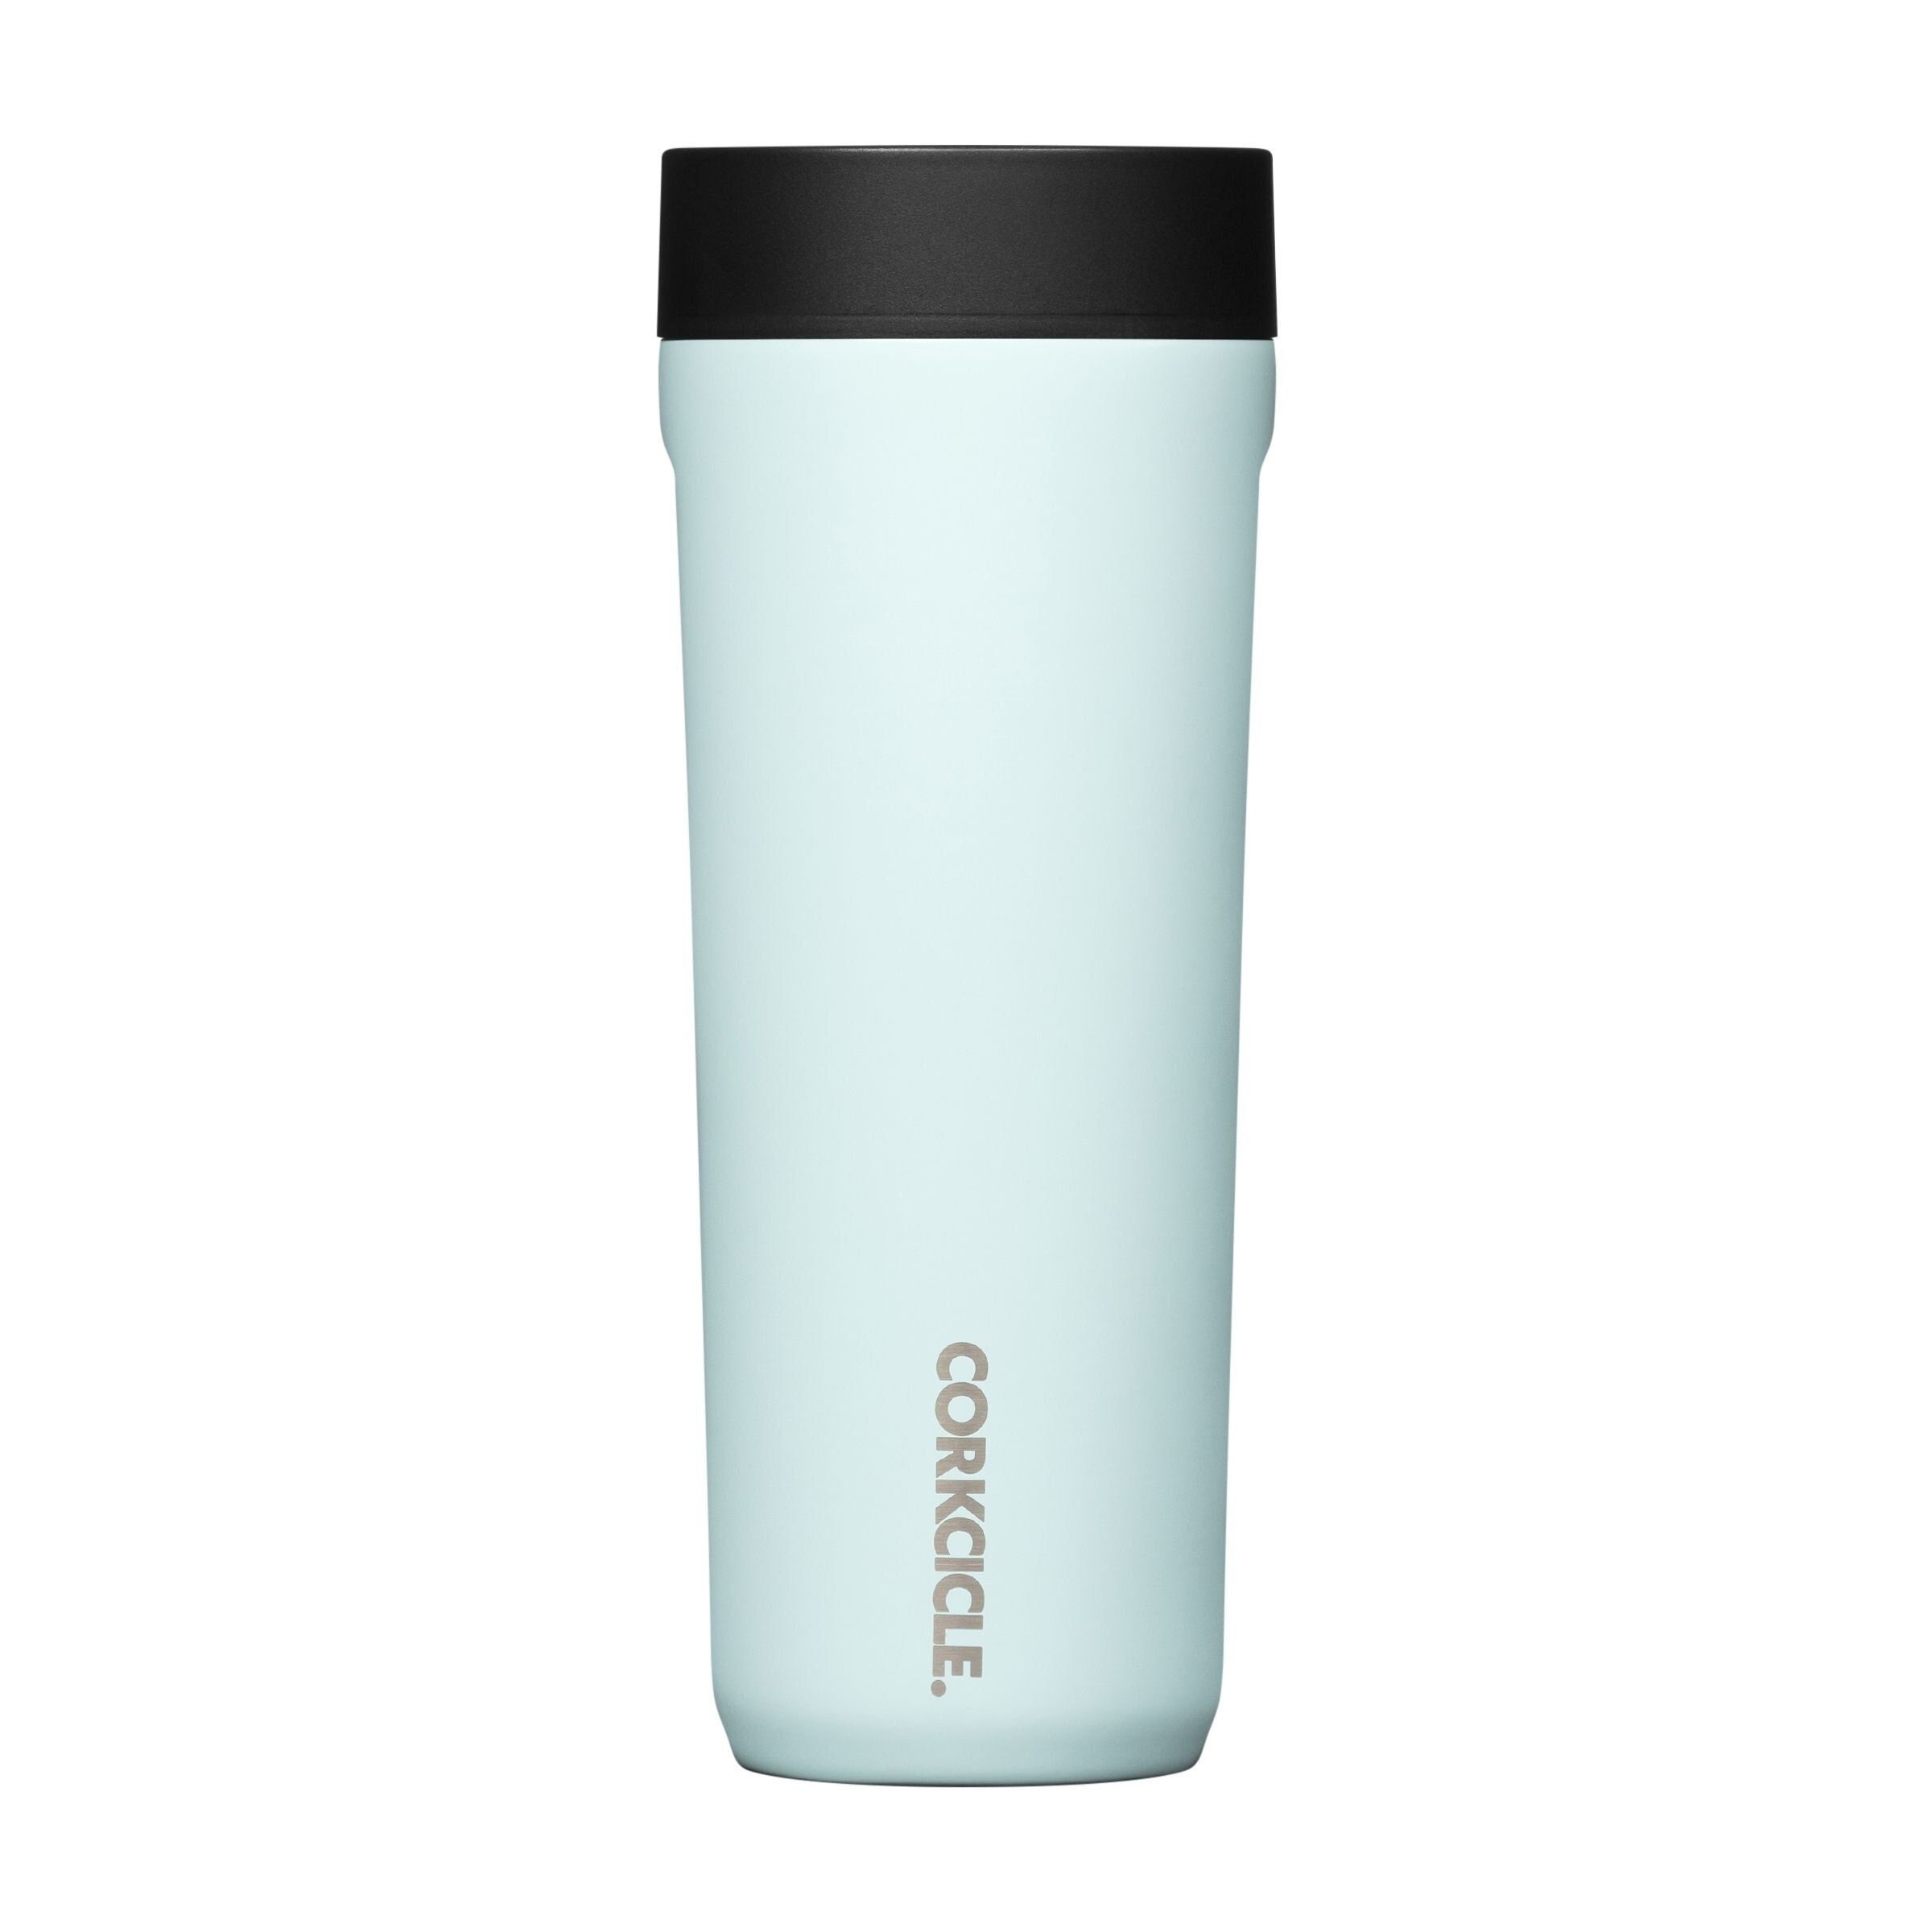 Corkcicle 2-pack Insulated Coffee Mugs with Gift Boxes - 21191925